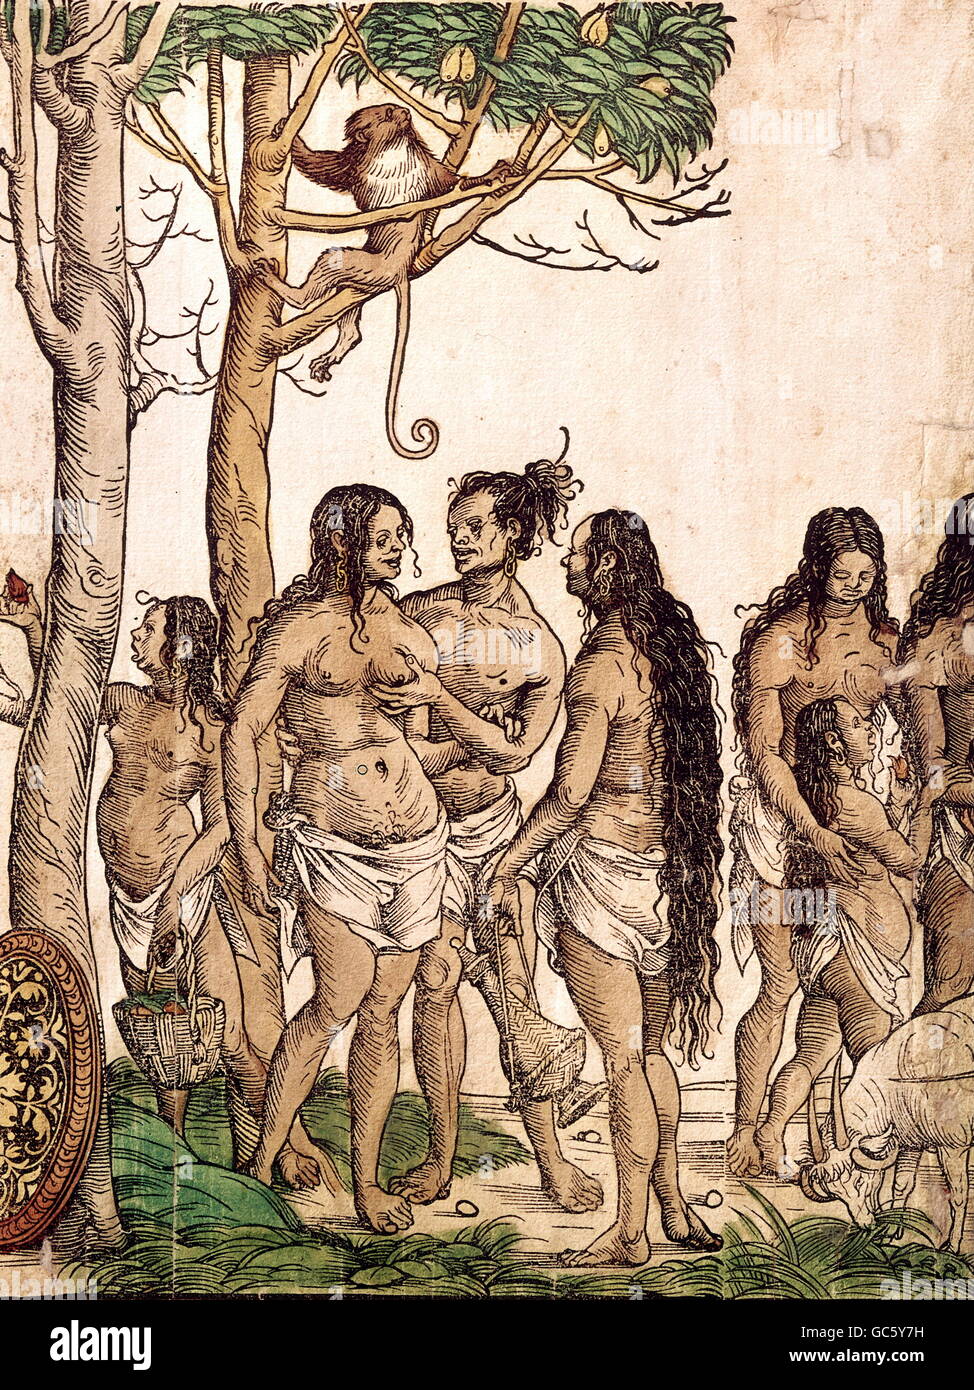 people, ethnics, America, Red Indians, woodcut by Hans Burgkmair the Elder (1473 - 1531), Welser chronicle, Venezuela expedition, sheet 3, Additional-Rights-Clearences-Not Available Stock Photo